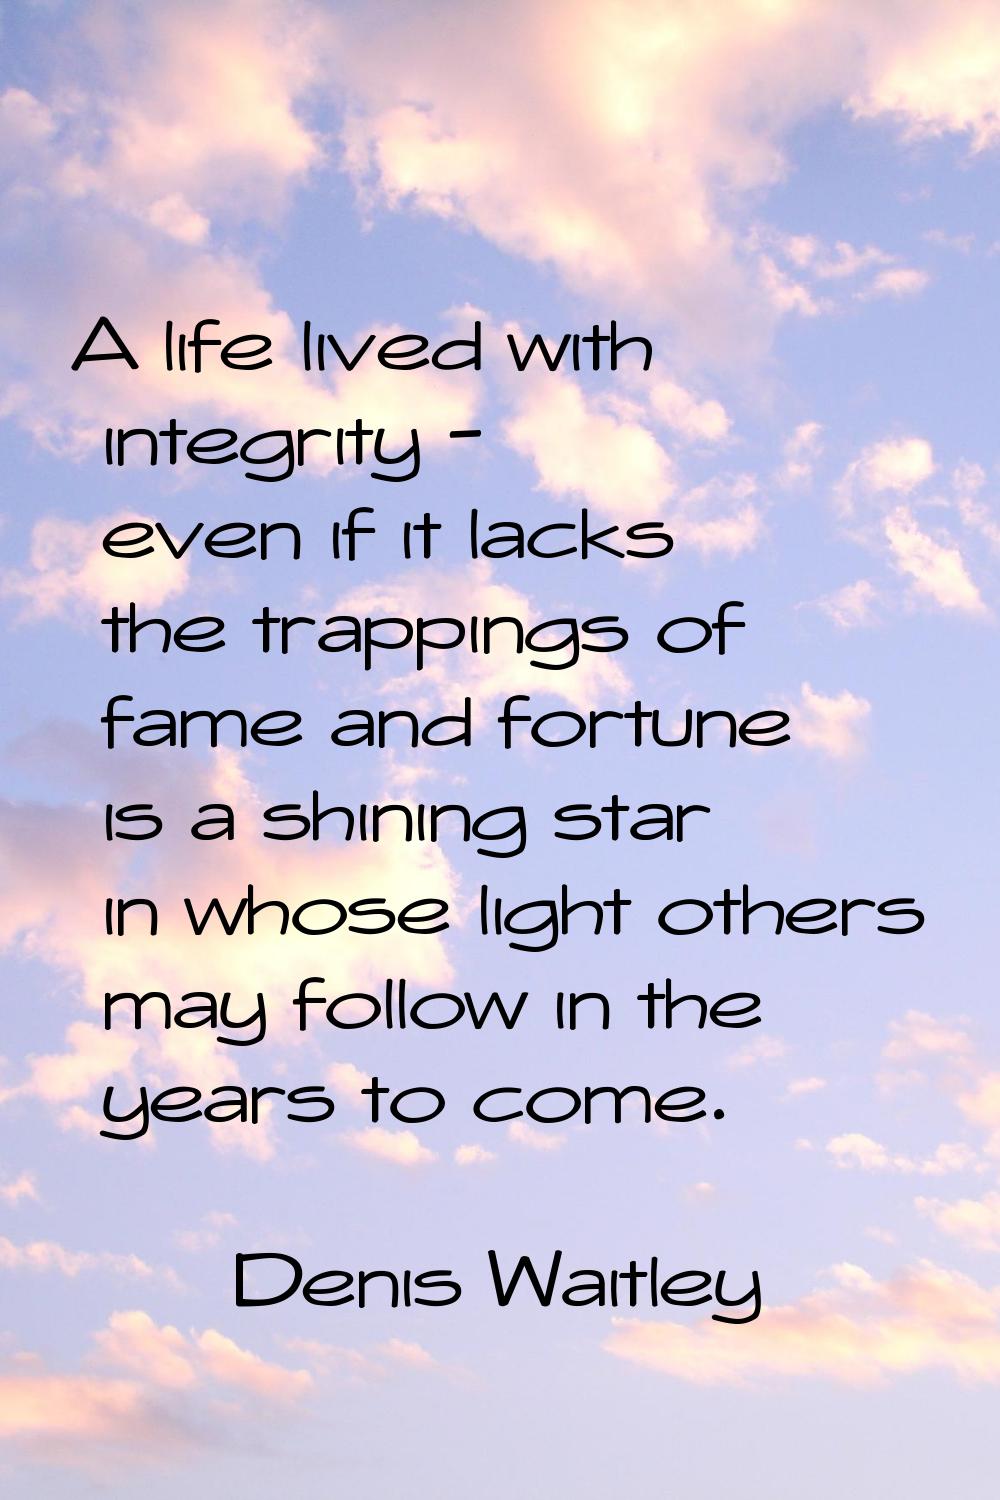 A life lived with integrity - even if it lacks the trappings of fame and fortune is a shining star 